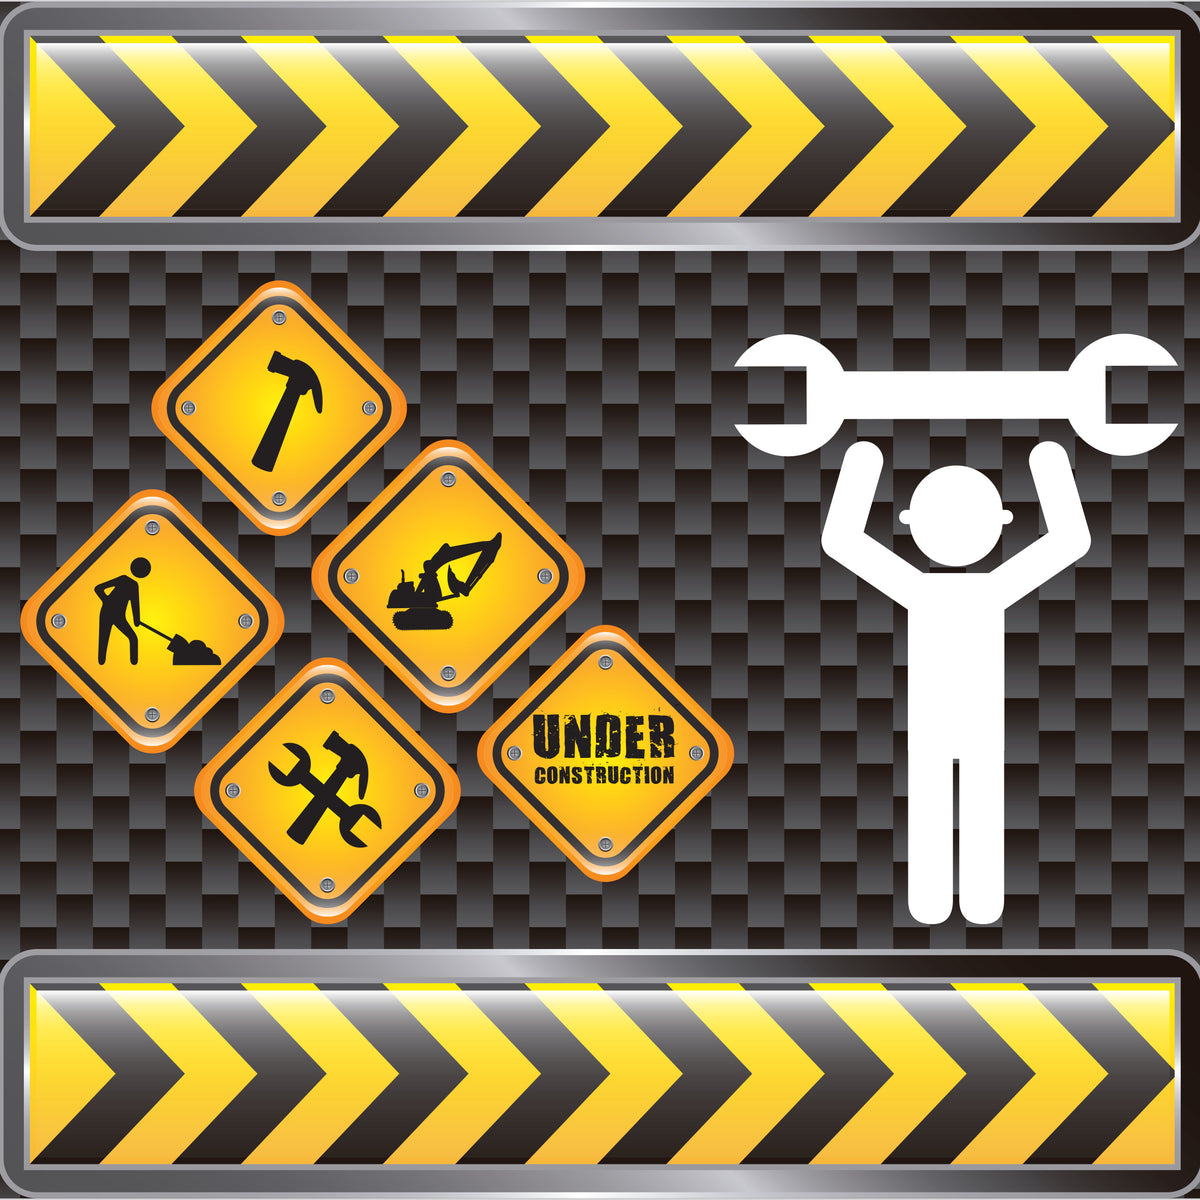 Machinery Signs